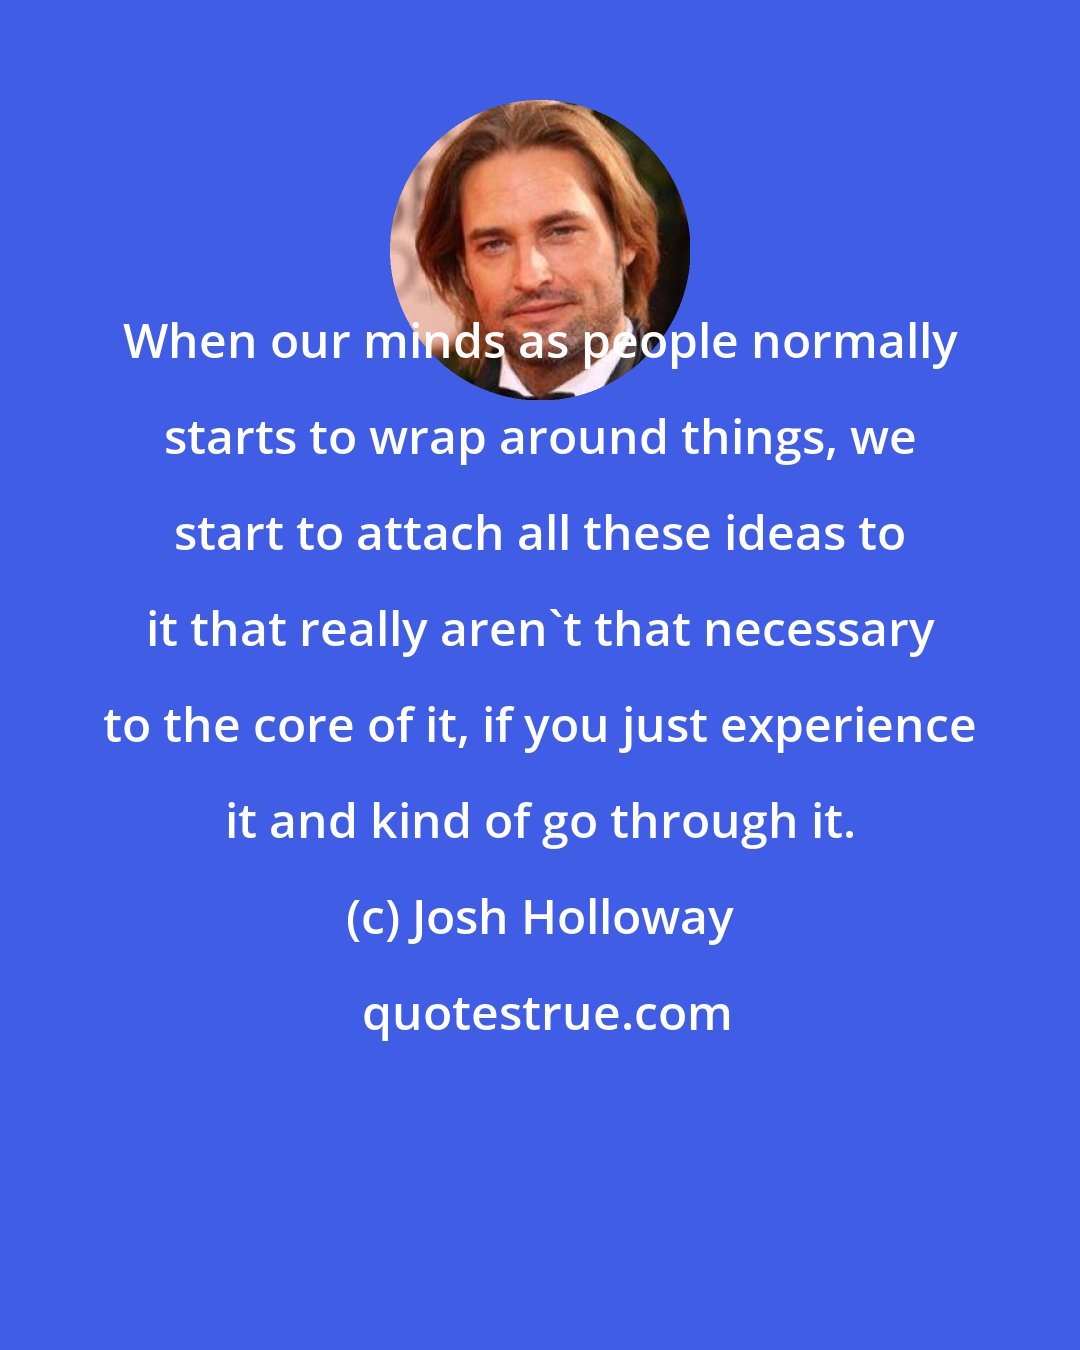 Josh Holloway: When our minds as people normally starts to wrap around things, we start to attach all these ideas to it that really aren't that necessary to the core of it, if you just experience it and kind of go through it.